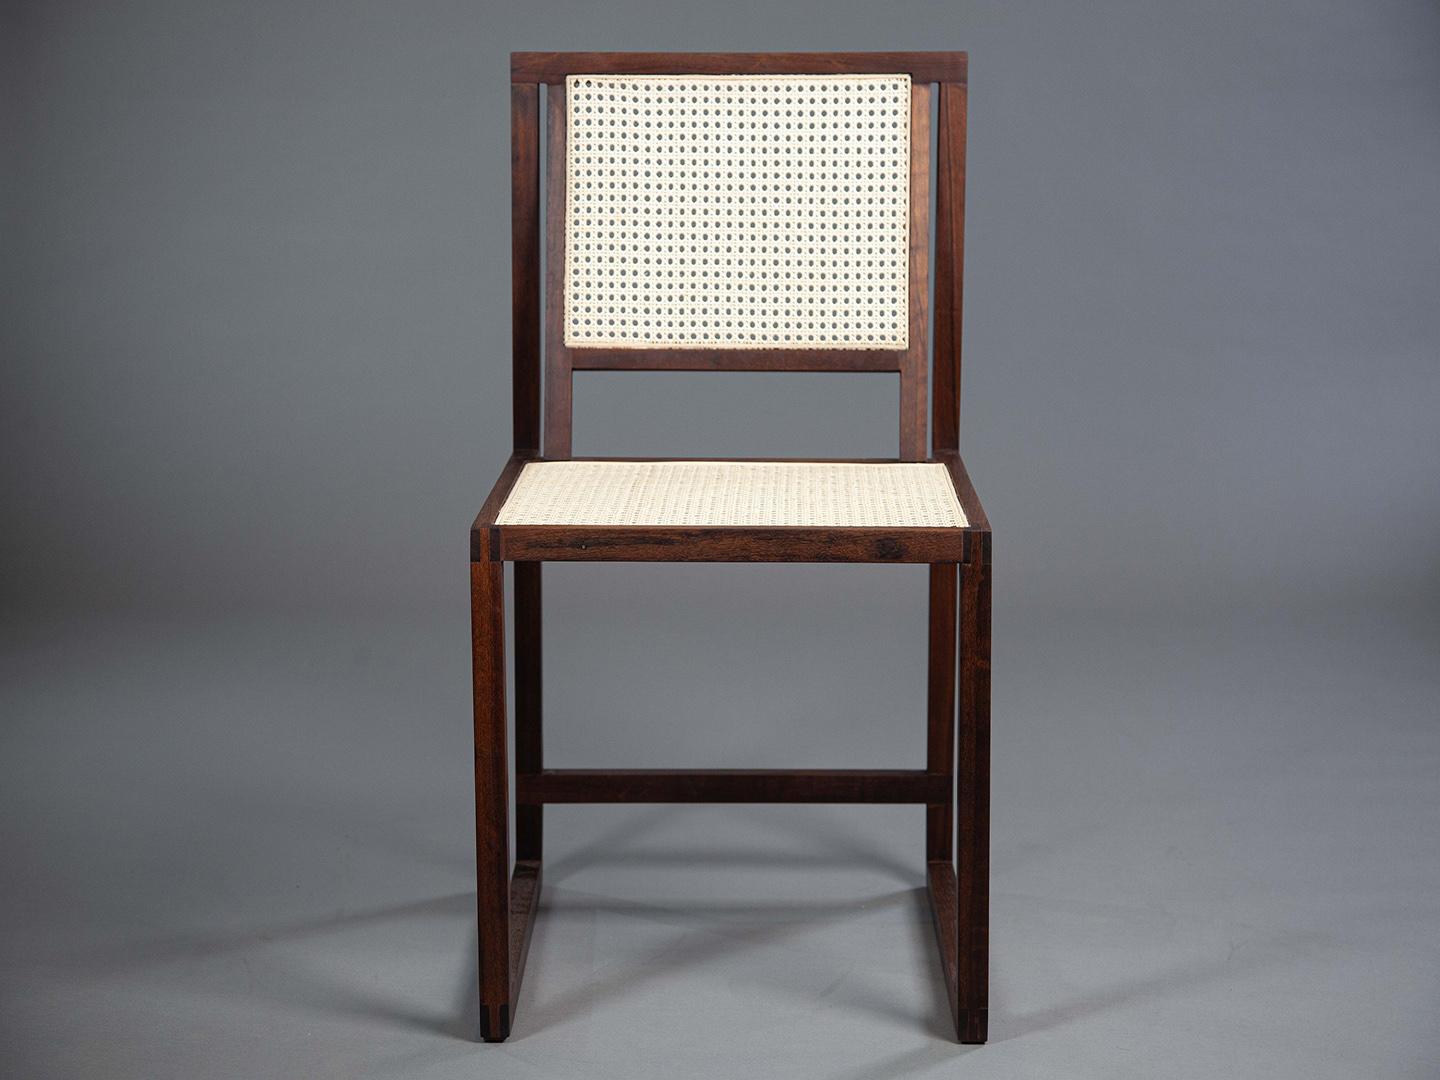 The Square Chair was designed to be used at dining tables and desks. Made from sucupira, freijó, jequitibá, or imbuia, it offers high comfort while remaining lightweight and durable. The backrest is crafted from natural Indian wicker, and the seat